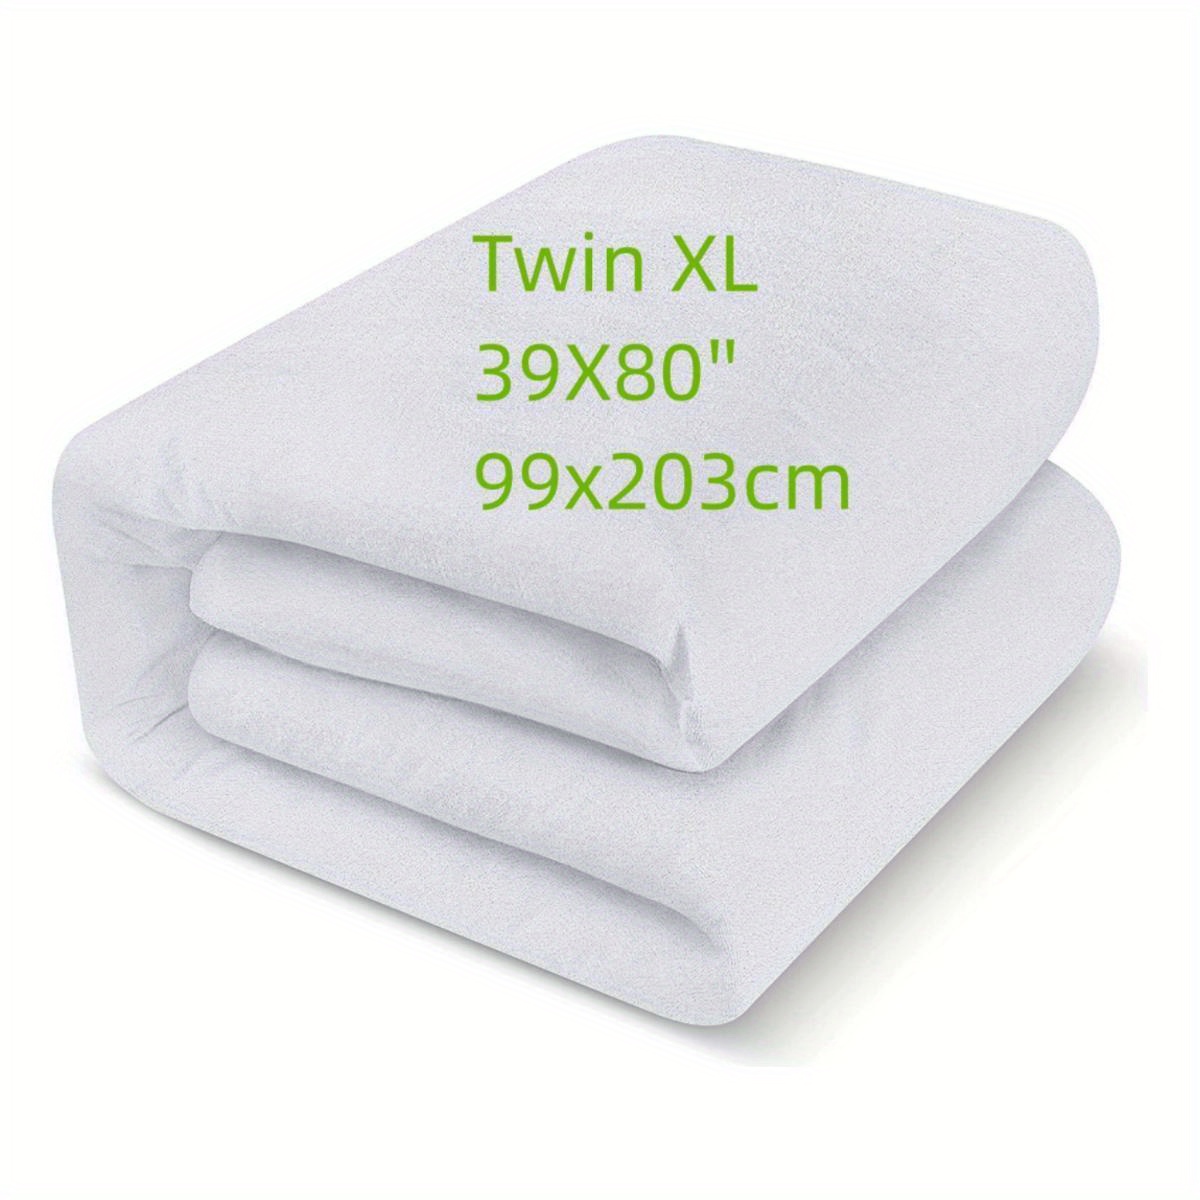 Twin XL Mattress Protector for College Dorm Room, Waterproof Breathable, White